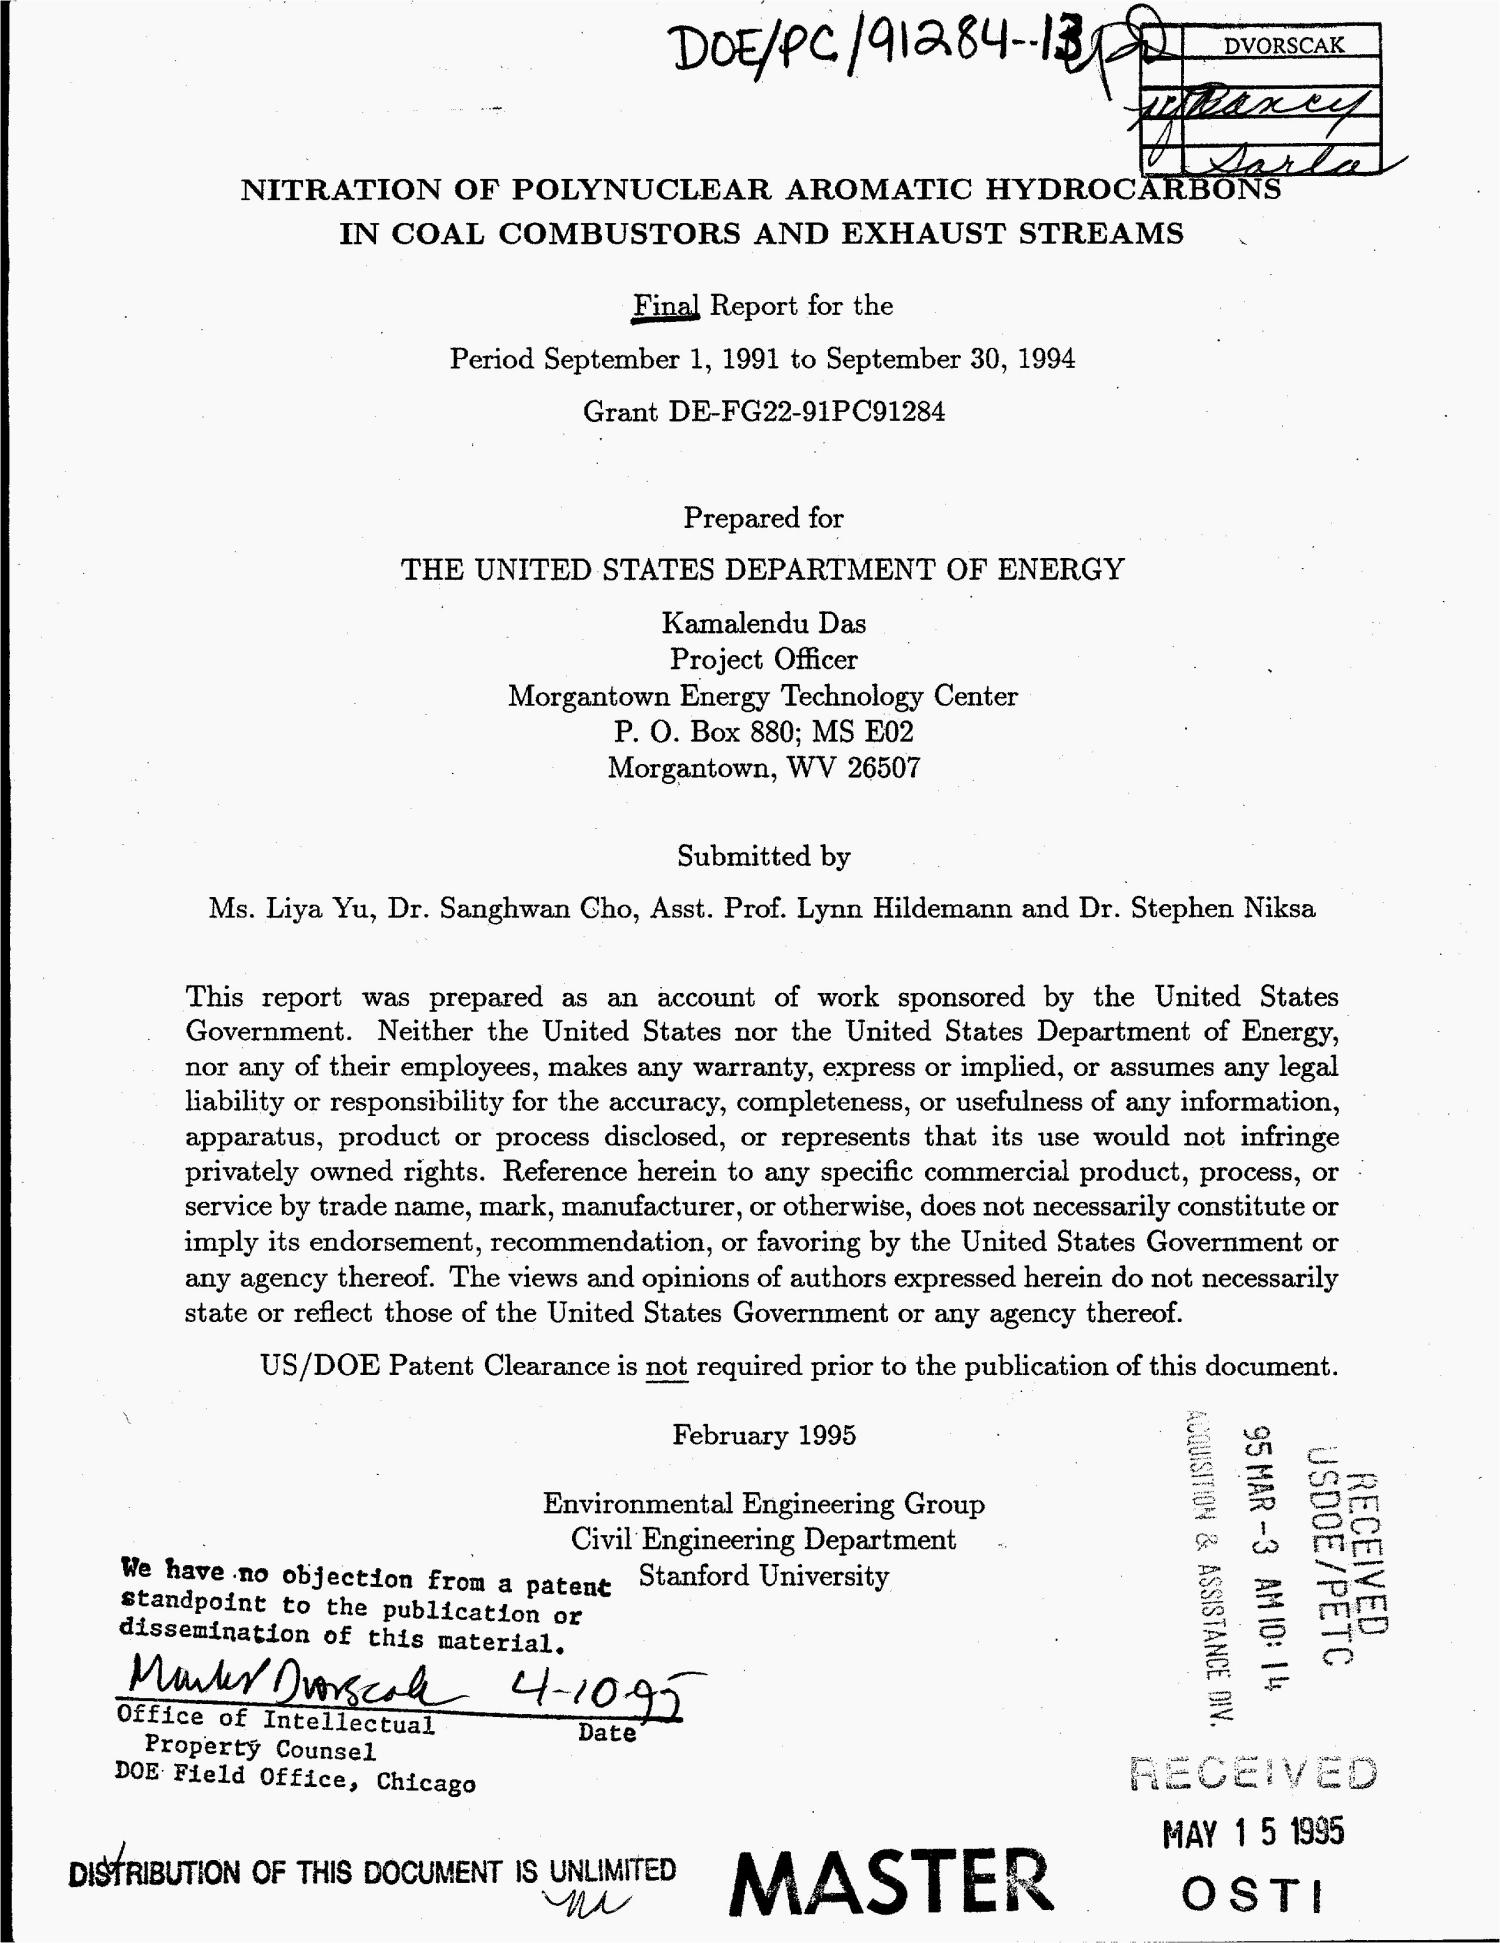 Nitration of polynuclear aromatic hydrocarbons in coal combustors and exhaust streams: Final report, September 1, 1991--September 30, 1994
                                                
                                                    [Sequence #]: 1 of 32
                                                